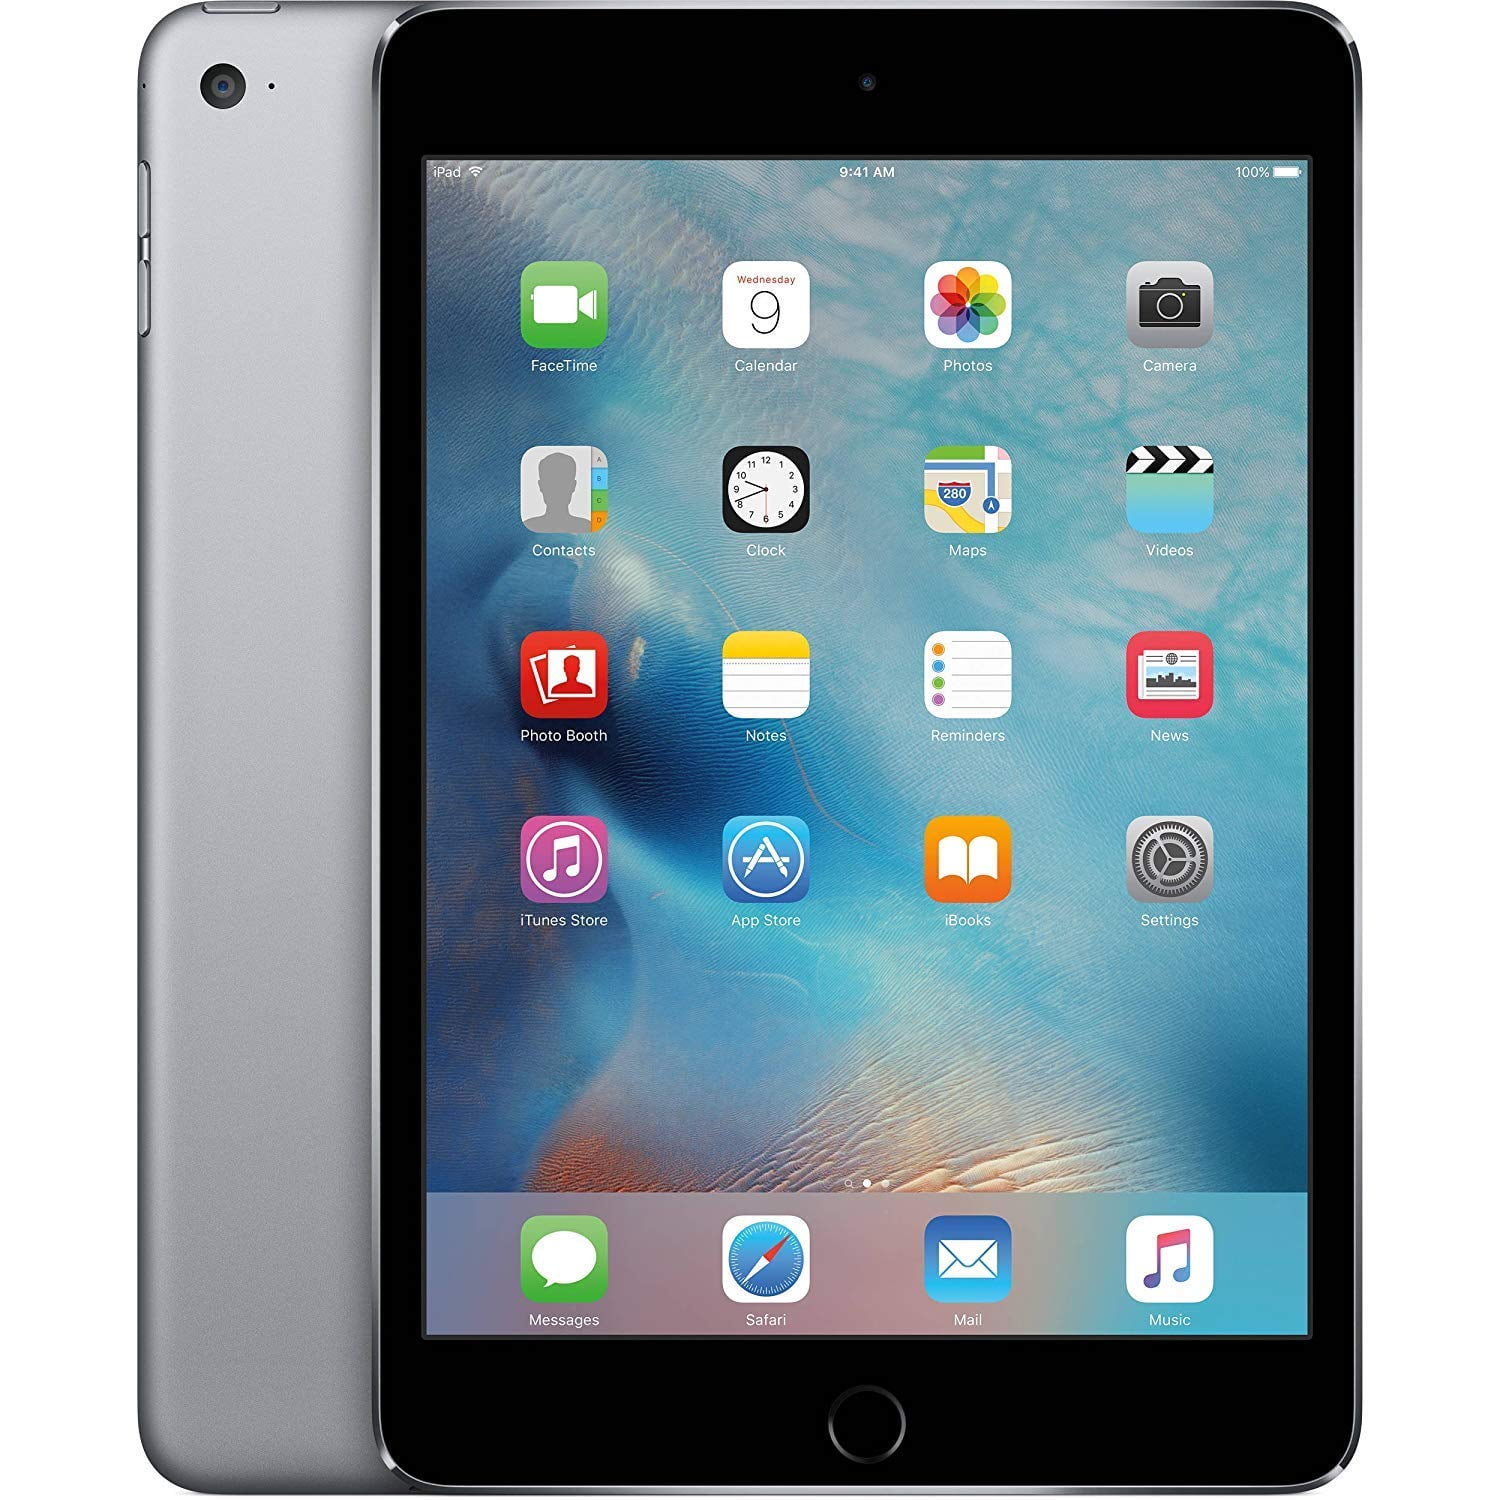 Apple iPad mini 2, WiFi Only, Space Gray 32gb (Scratch and Dent)